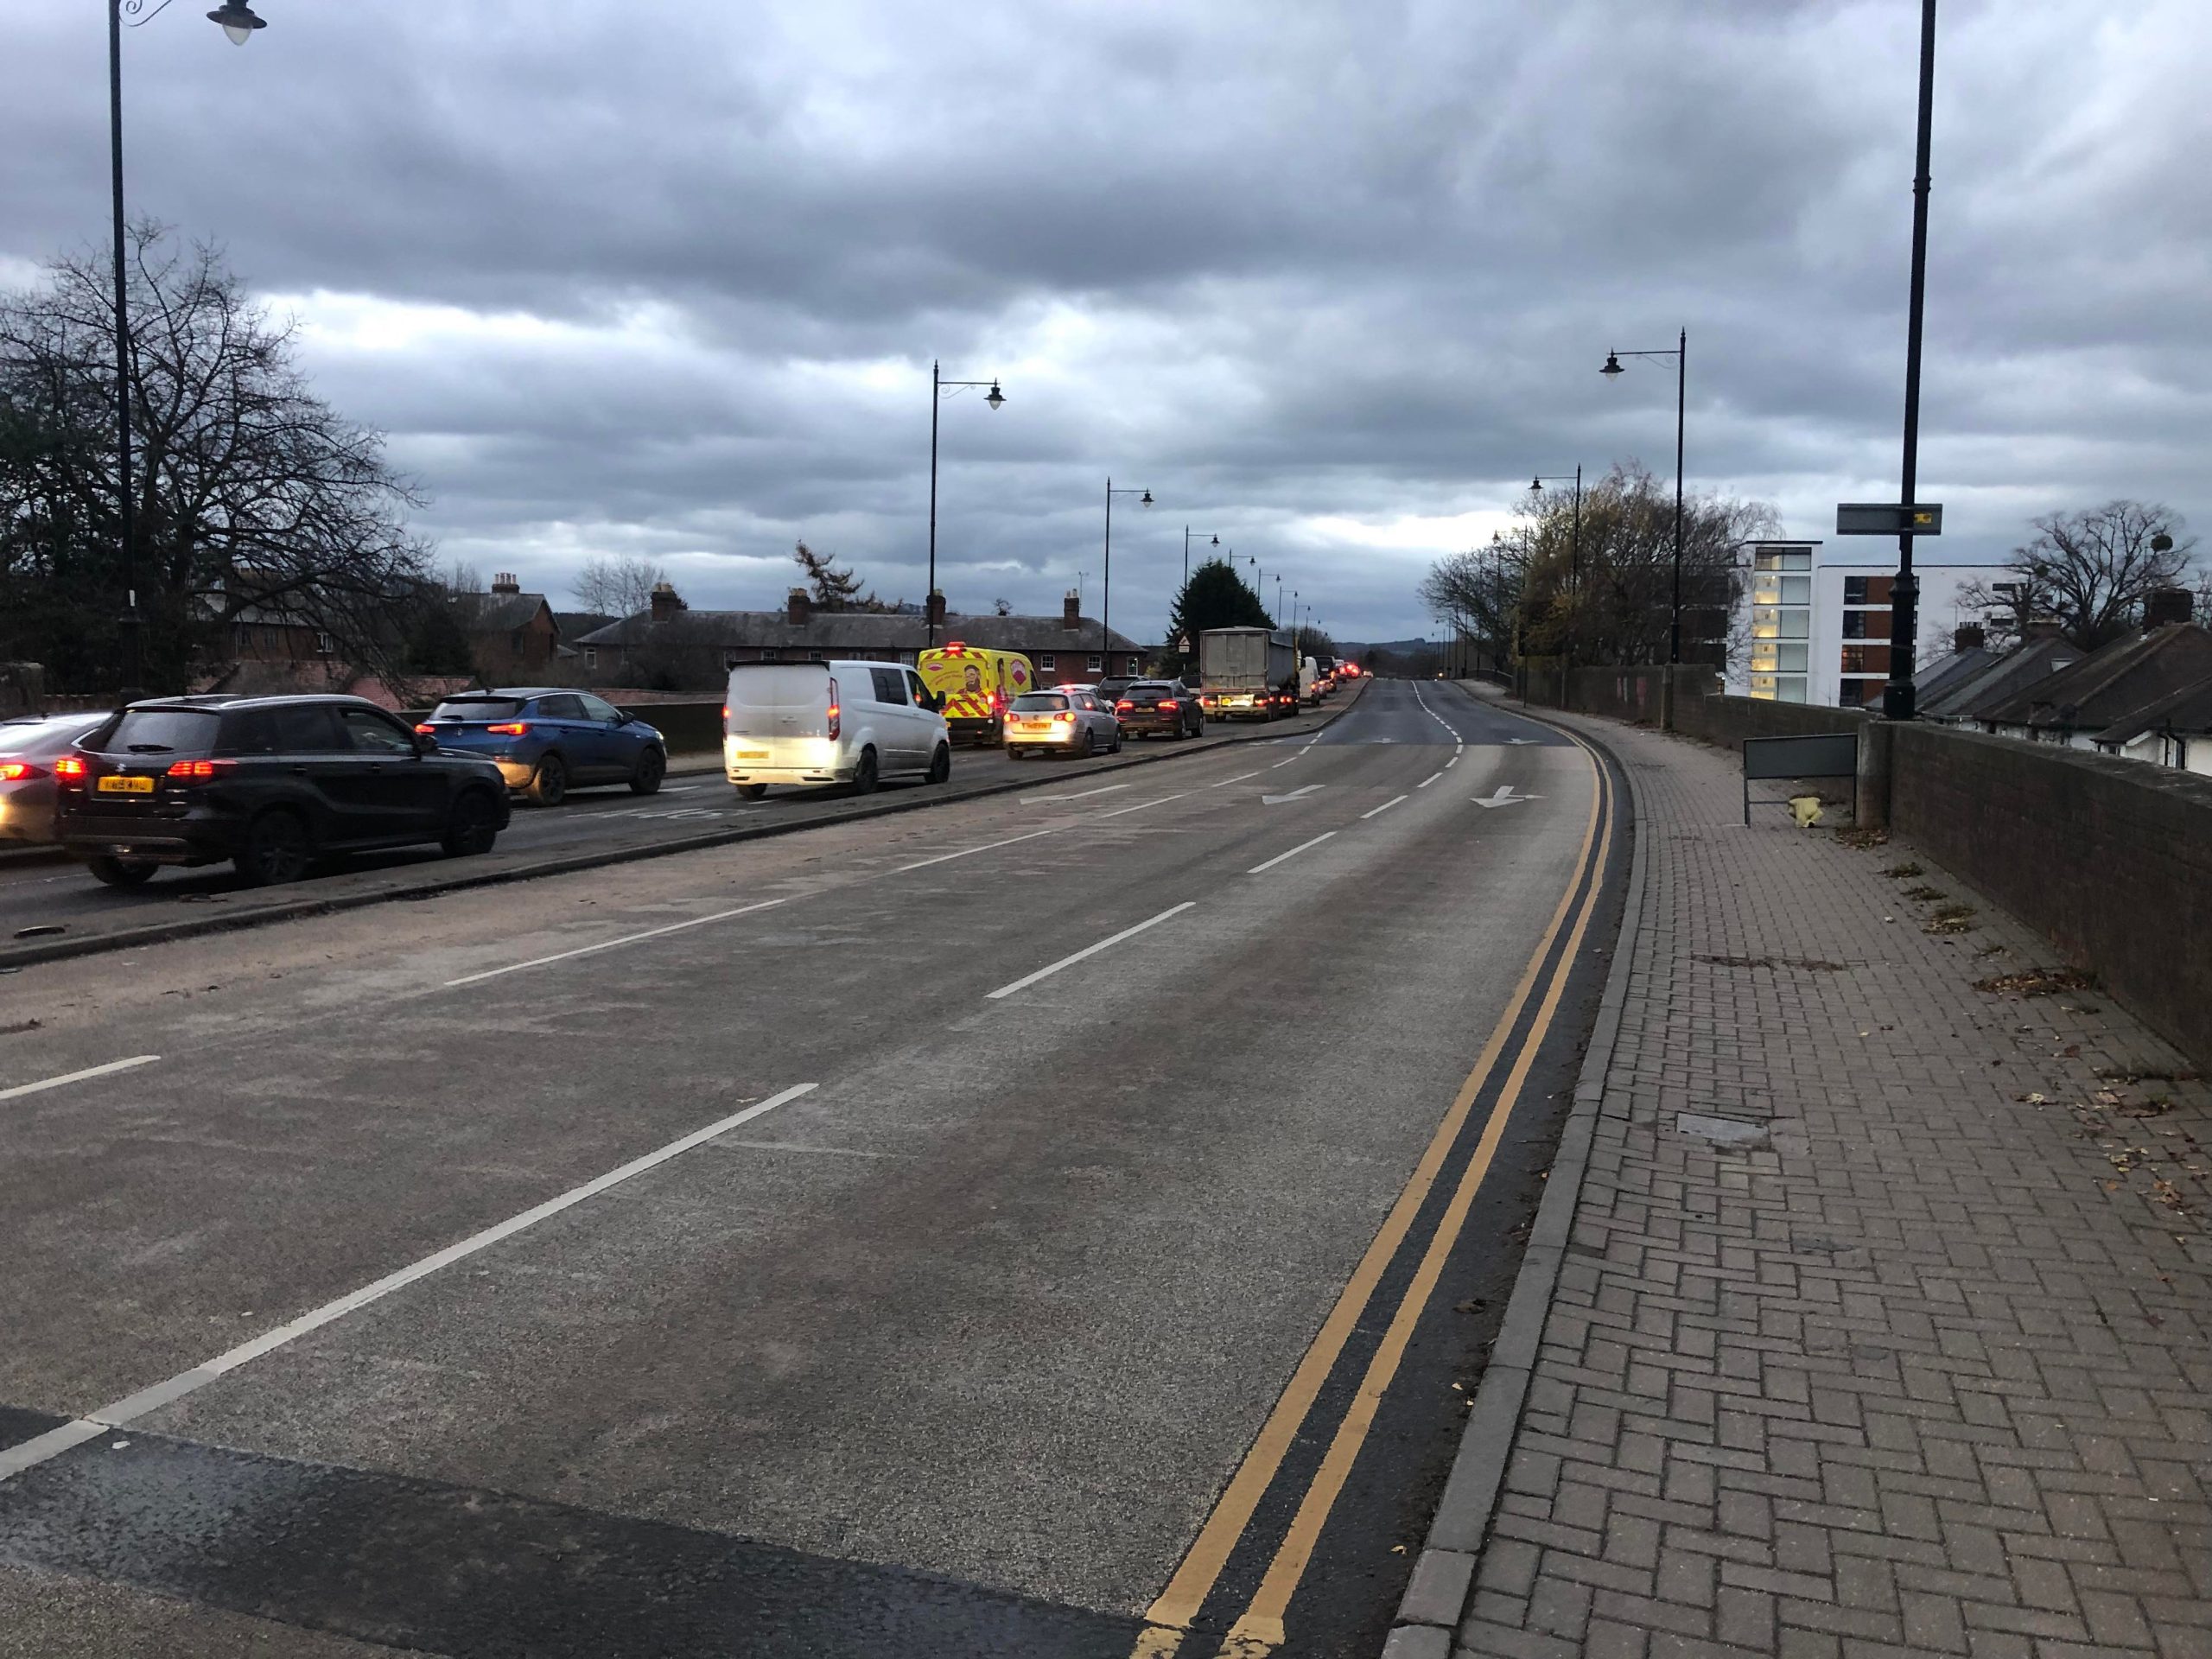 NEWS | Travel chaos in Hereford this morning as two collisions result in gridlock on major roads